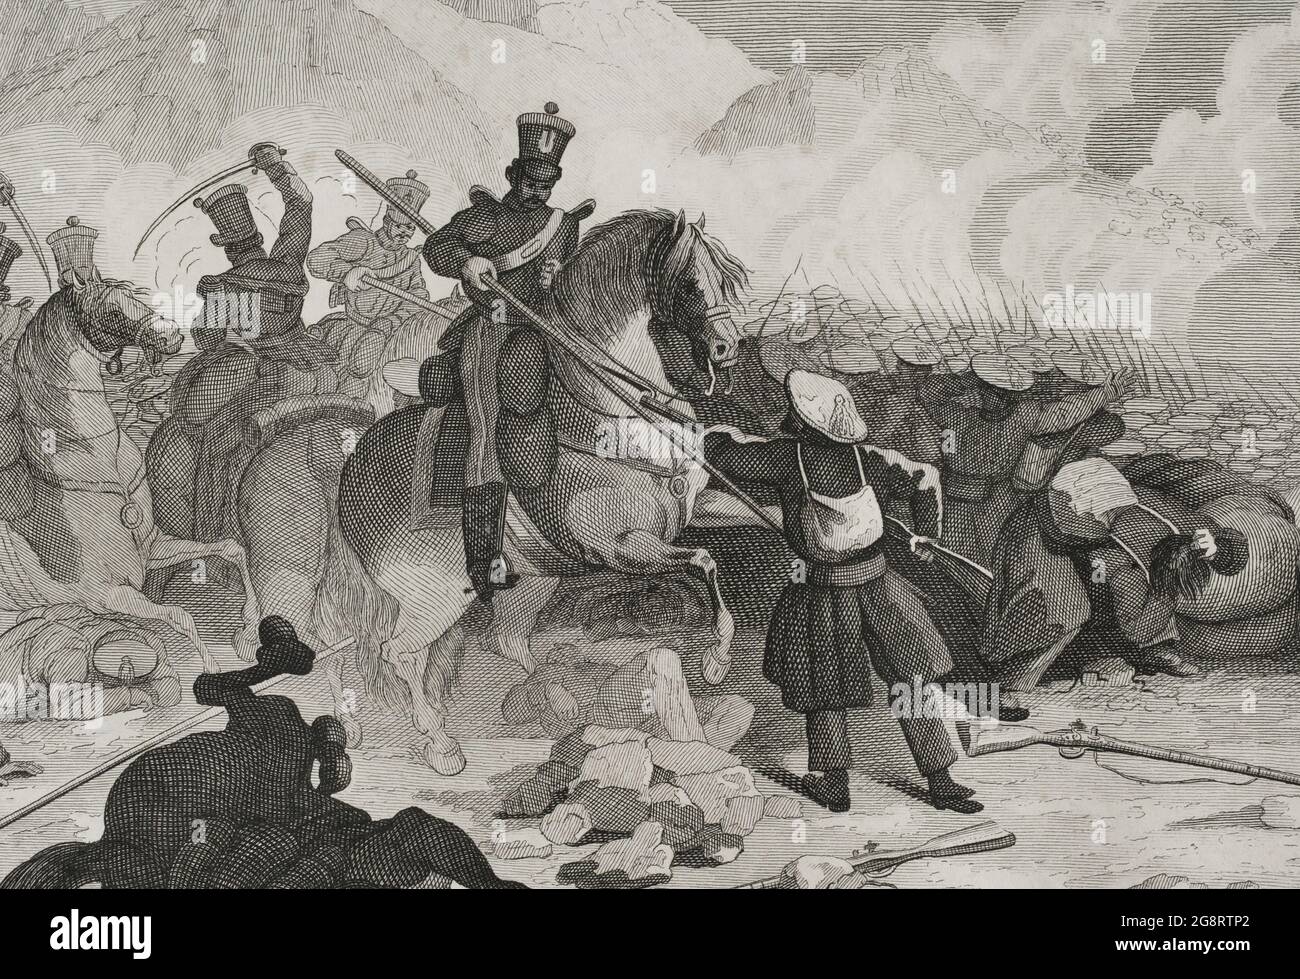 Spain. First Carlist War (1833-1840). Civil war that confronted Carlists, supporters of the Infante Carlos María Isidro de Borbón, against the Isabelinos (Elizabethans), defenders of Isabel II and the regent María Cristina de Borbón. Northern Front. Attack by Liberal troops on the road to Legazpia. Illustration by Manuel Miranda. Engraving by Pedro Celestino Maré. Detail. Panorama Español, Crónica Contemporánea. Madrid, 1842. Stock Photo